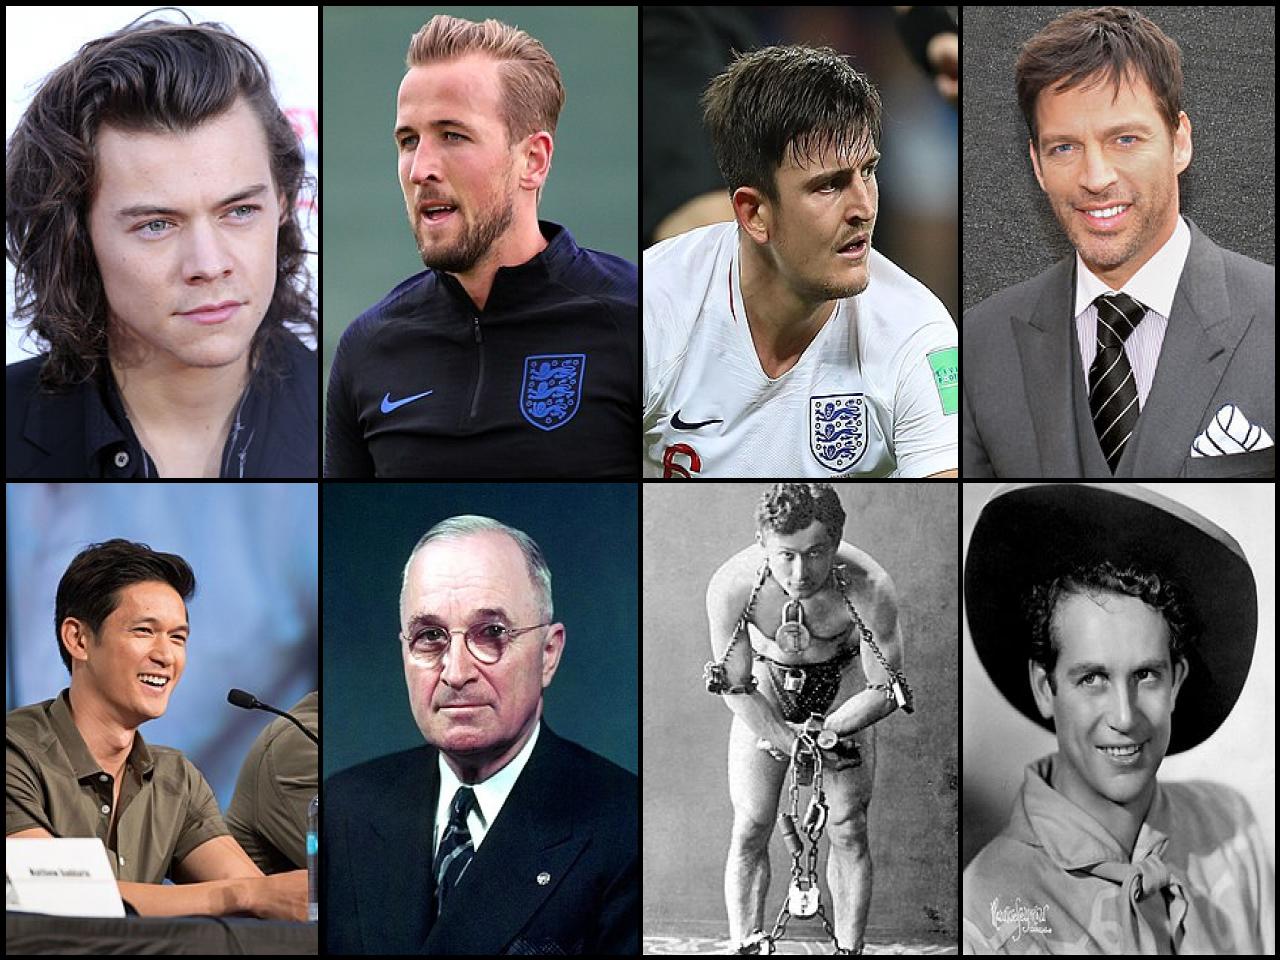 List of Famous people named <b>Harry</b>